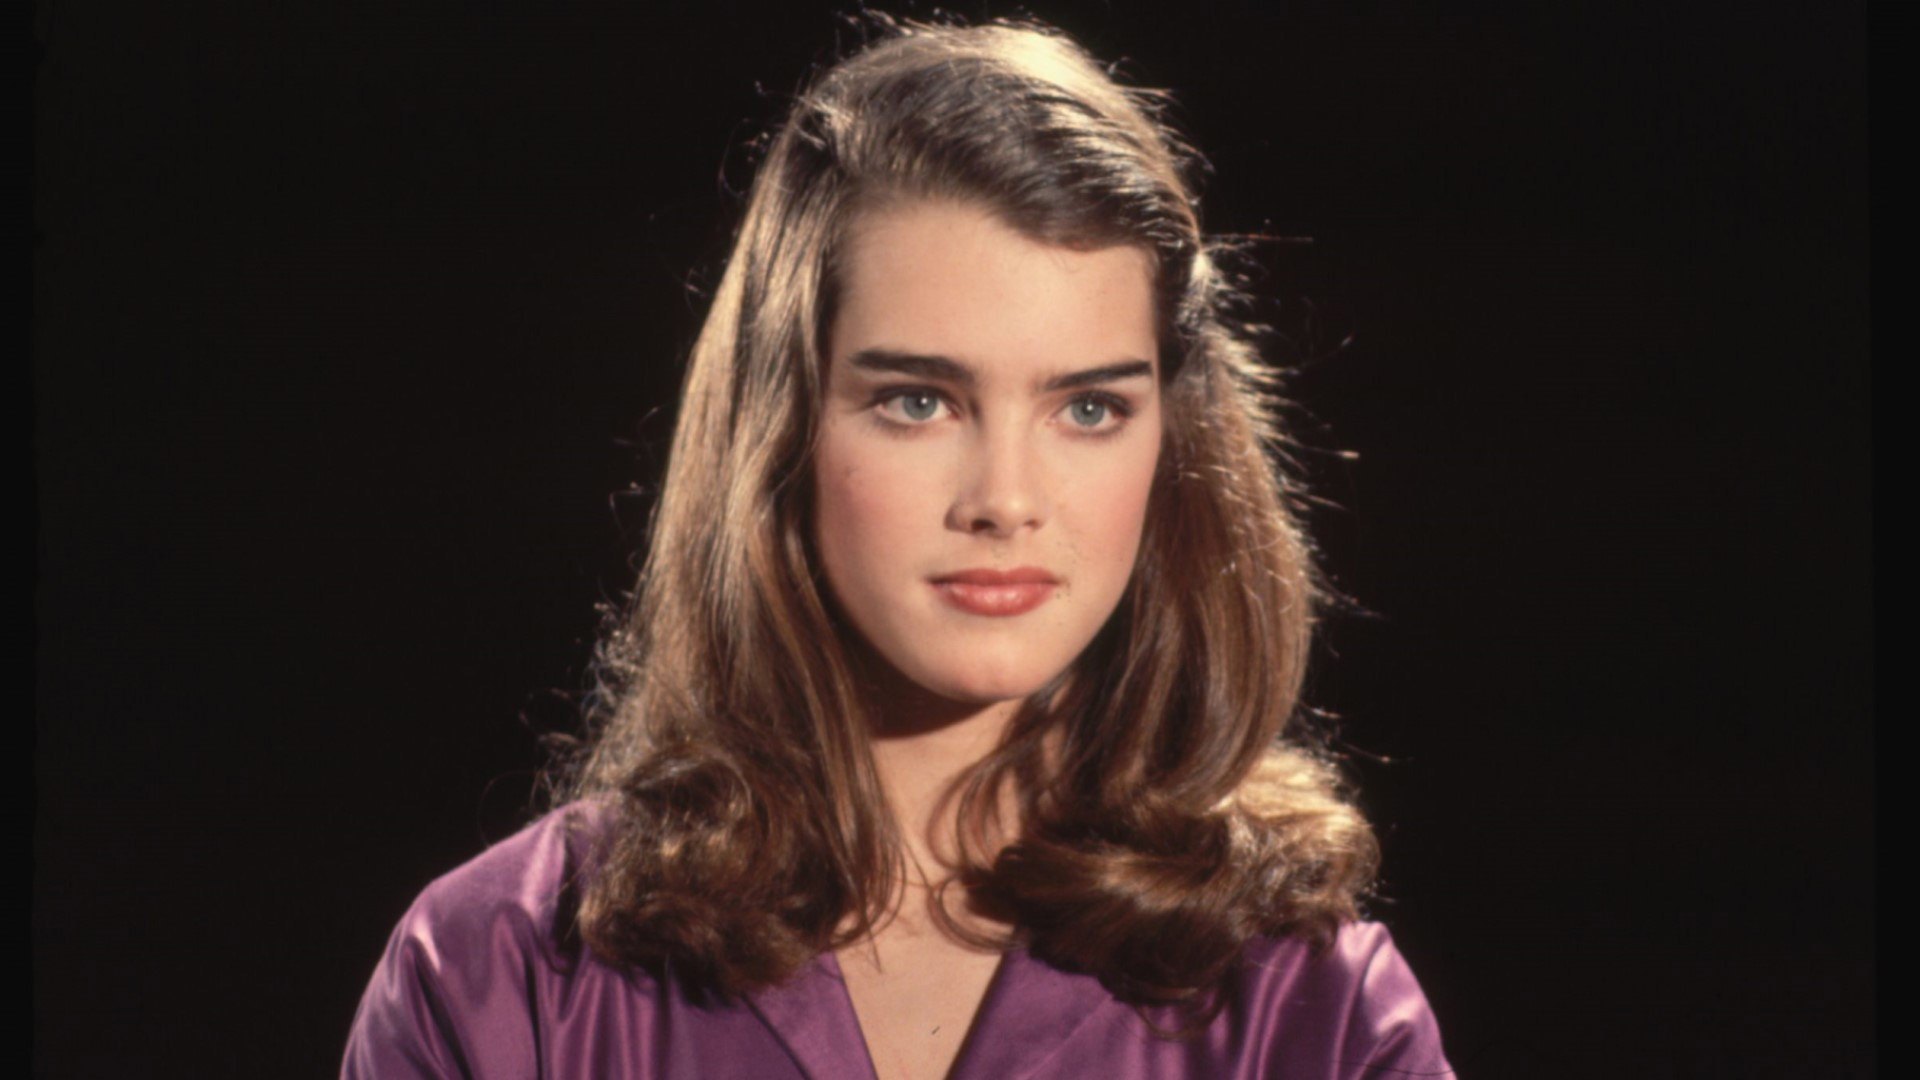 Pretty Baby: see how Brooke Shields changed since 'The Blue Lagoon'